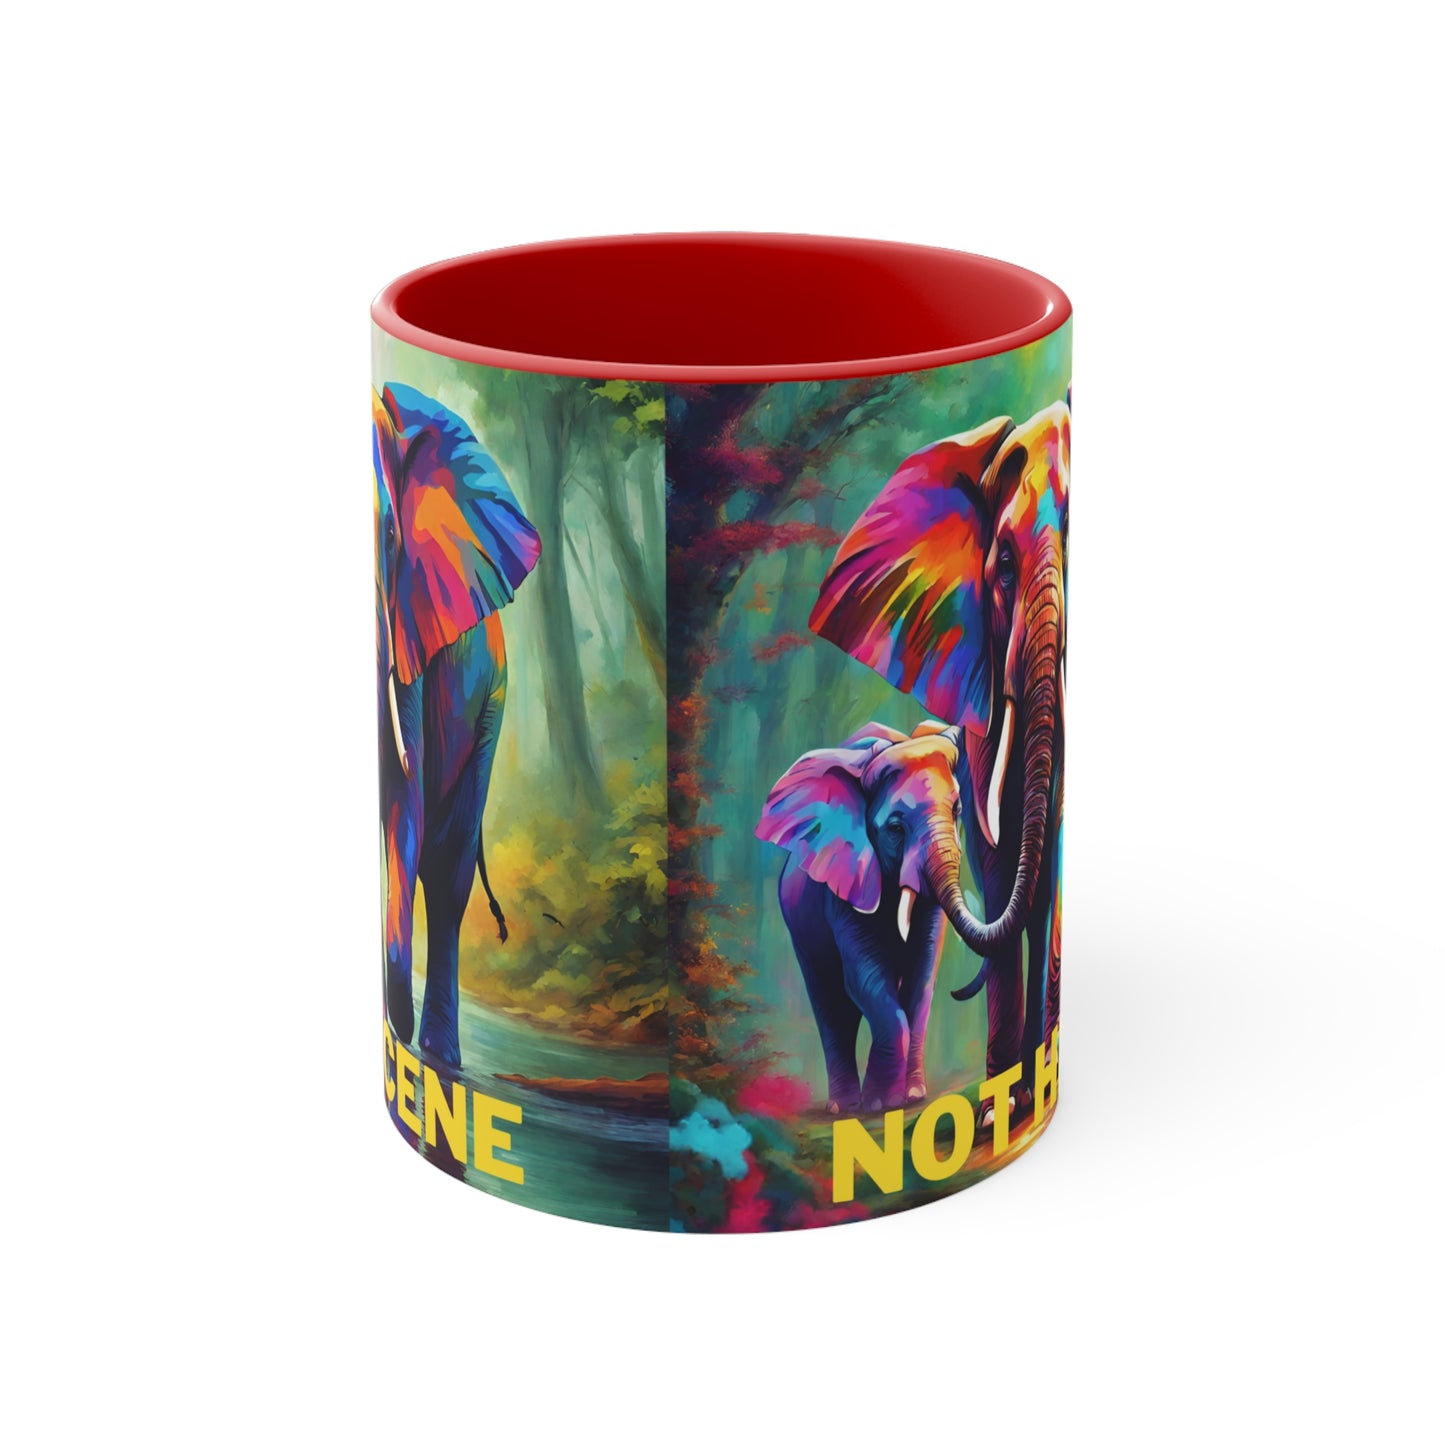 Colorful and beautifully designed “BE SCENE NOT HERD” Accent Coffee Mug, 11oz. Great as a gift or get one to enjoy yourself.